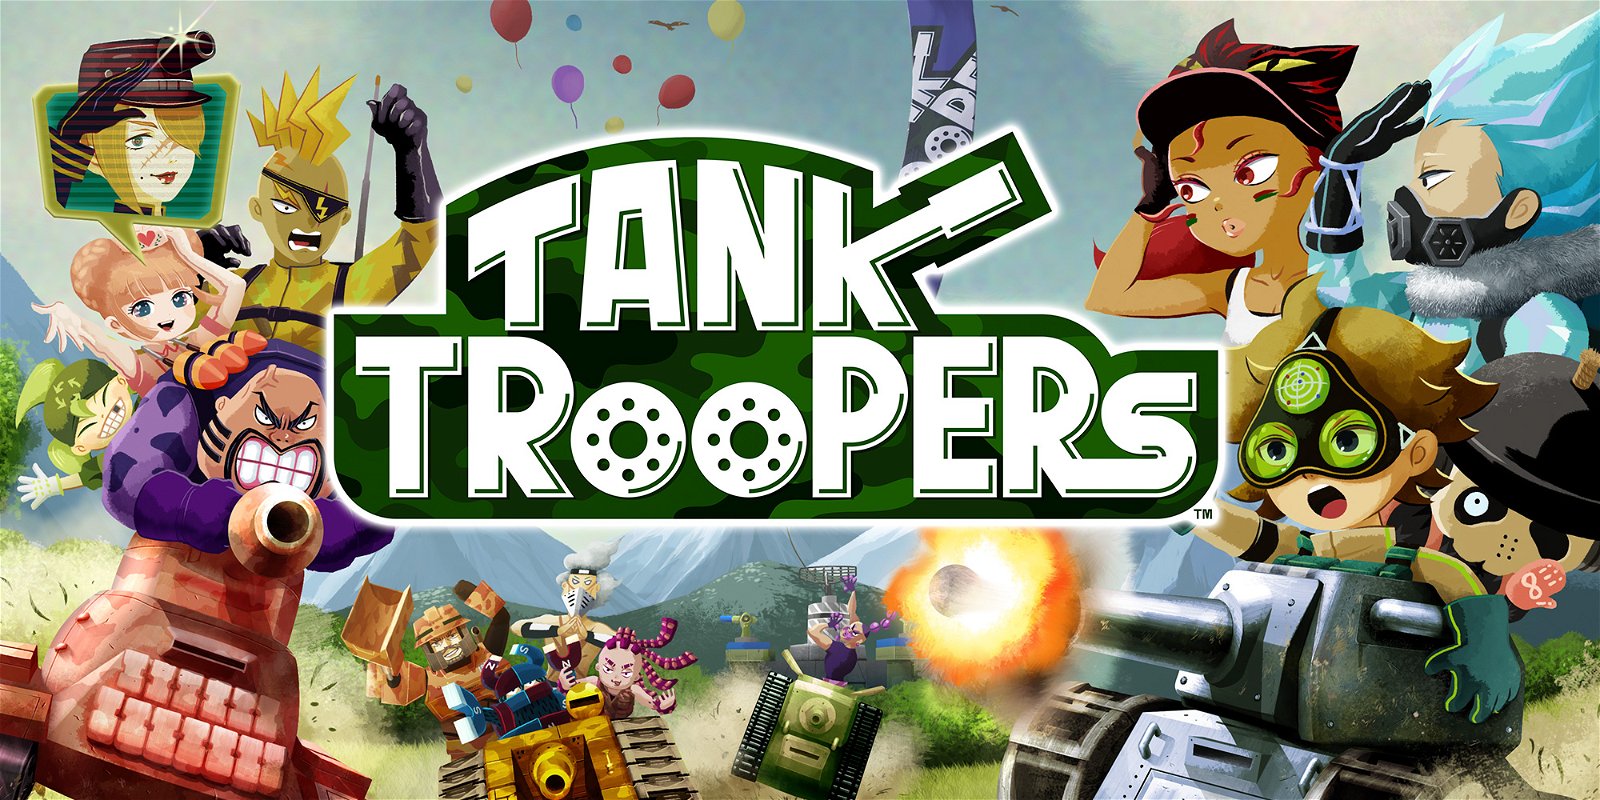 Image of Tank Troopers